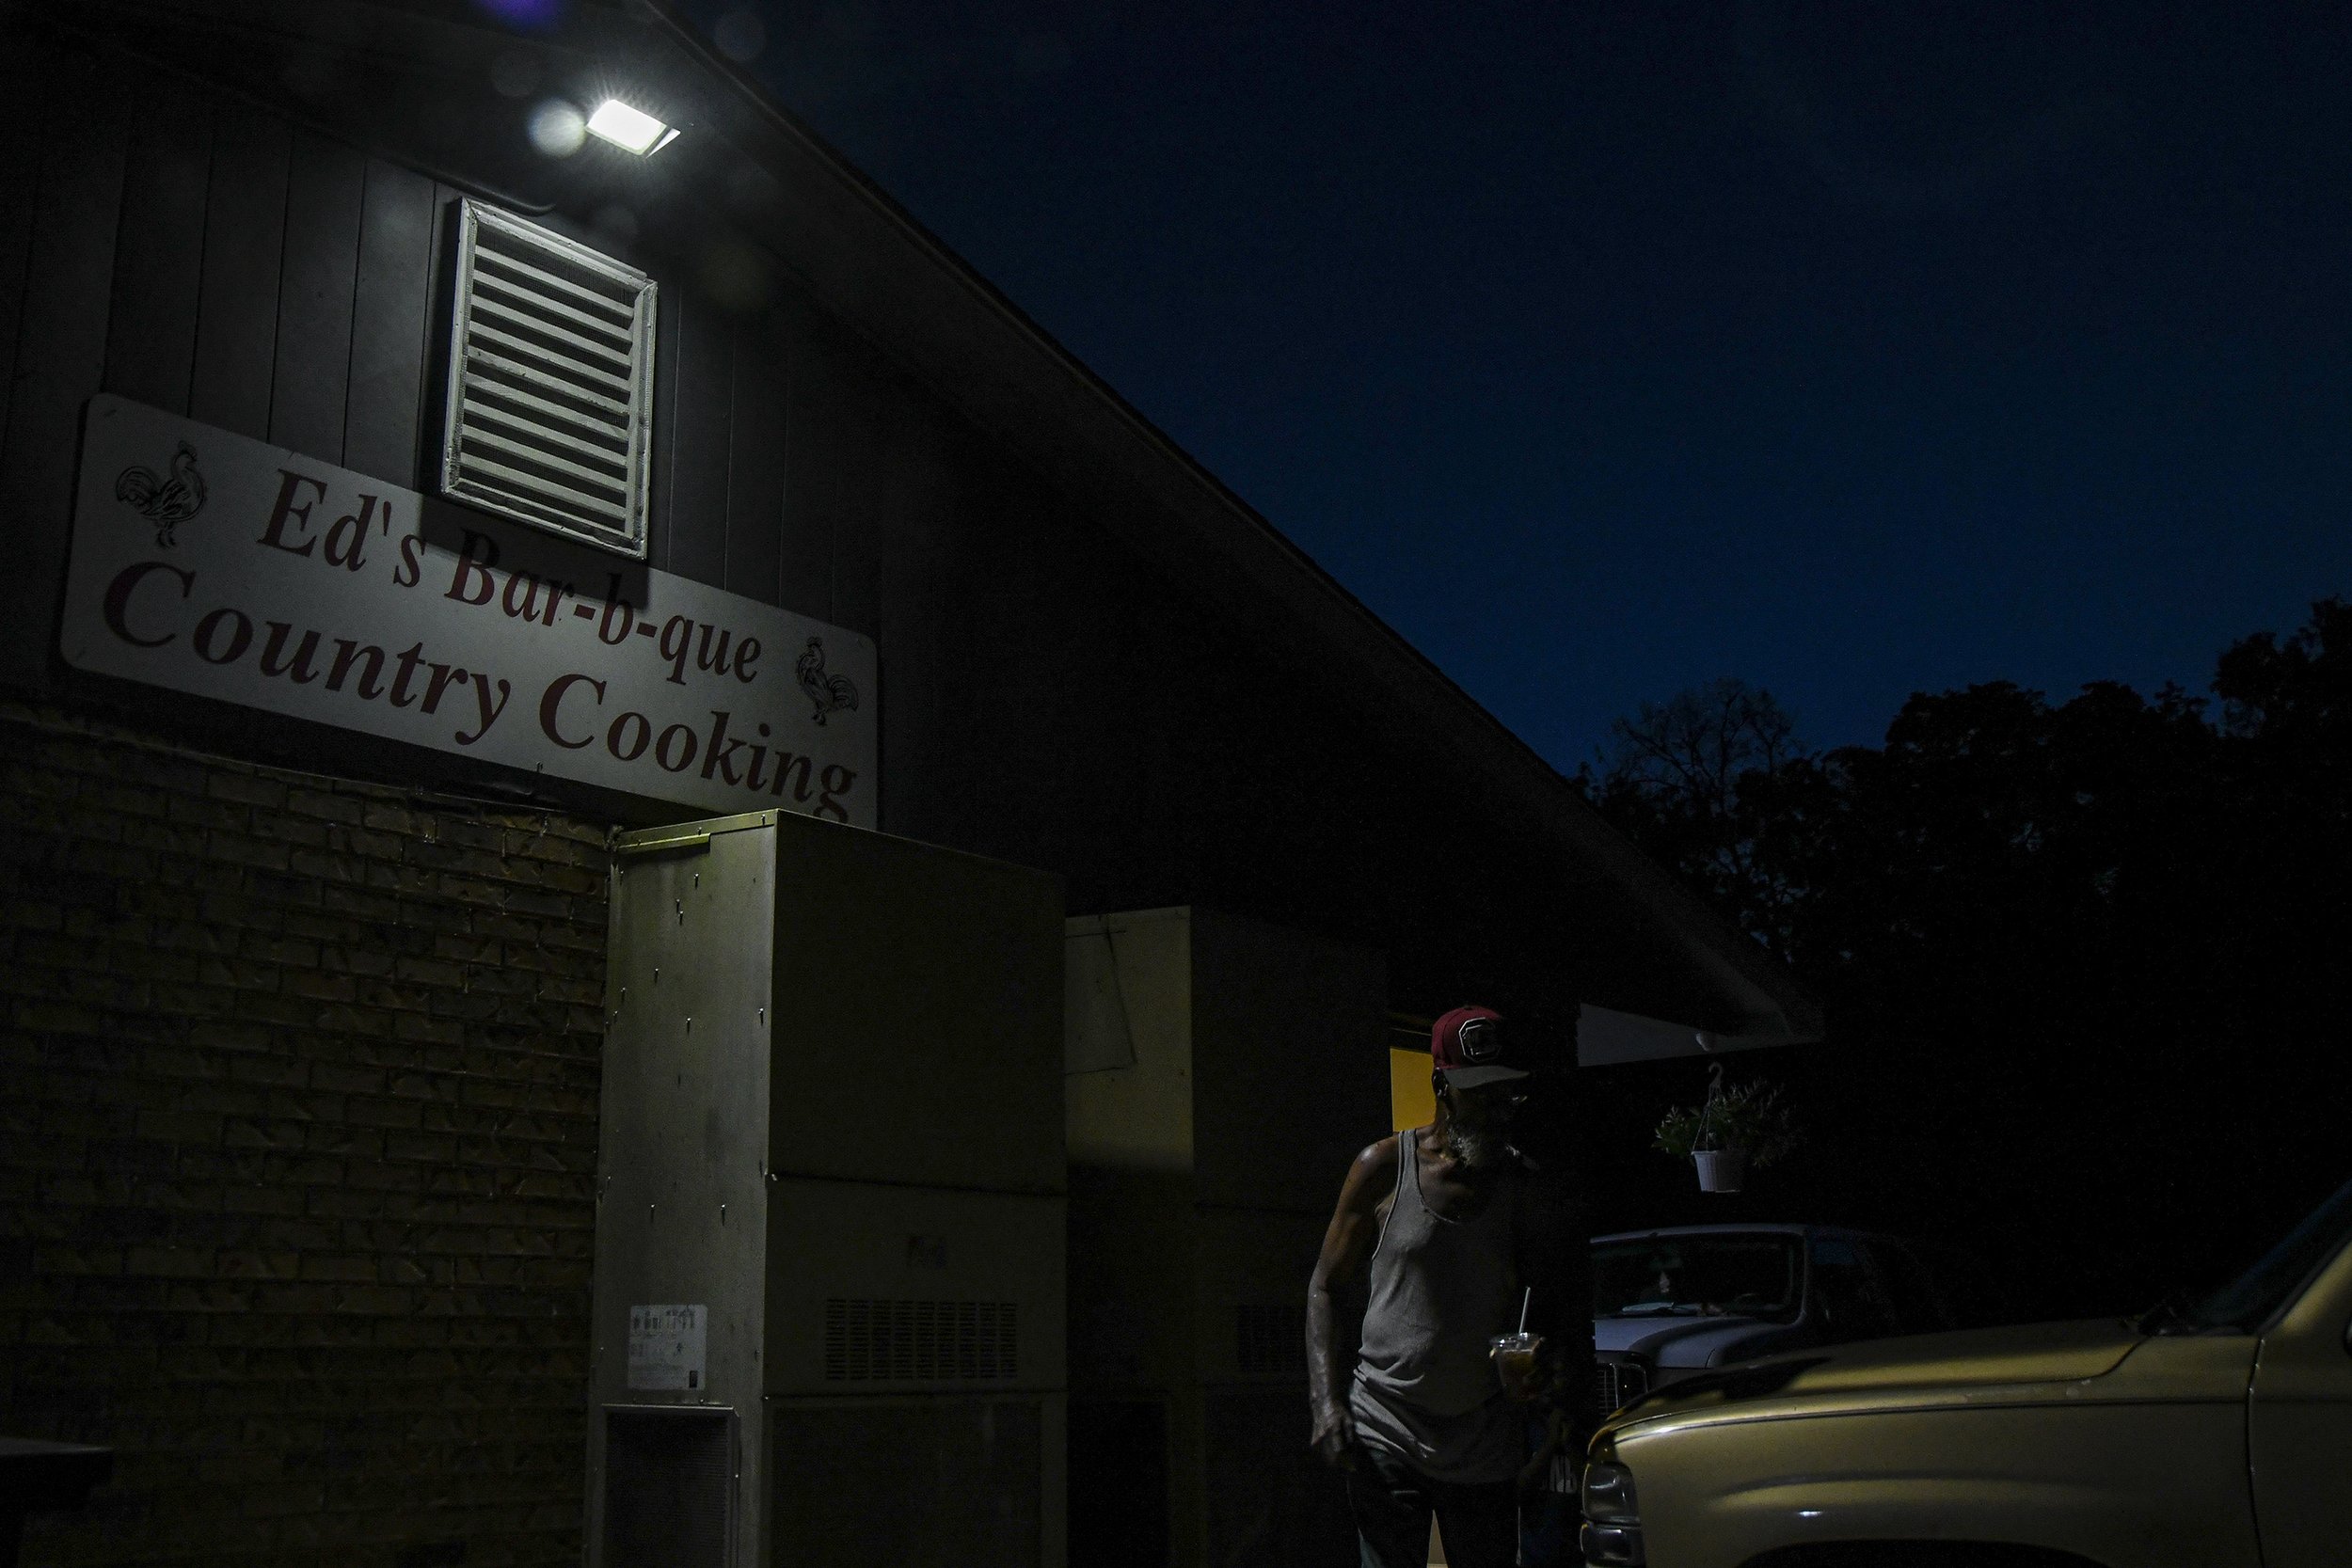  A customer leaves Ed’s Bar-b-que in Phenix City, Ala., Oct. 9, 2021. The restaurant is where Cedric Jamal Mifflin was stopped by Michael Seavers, a Phenix City police officer before Seavers shot at Mifflin 15 times, killing Mifflin, a young unarmed 